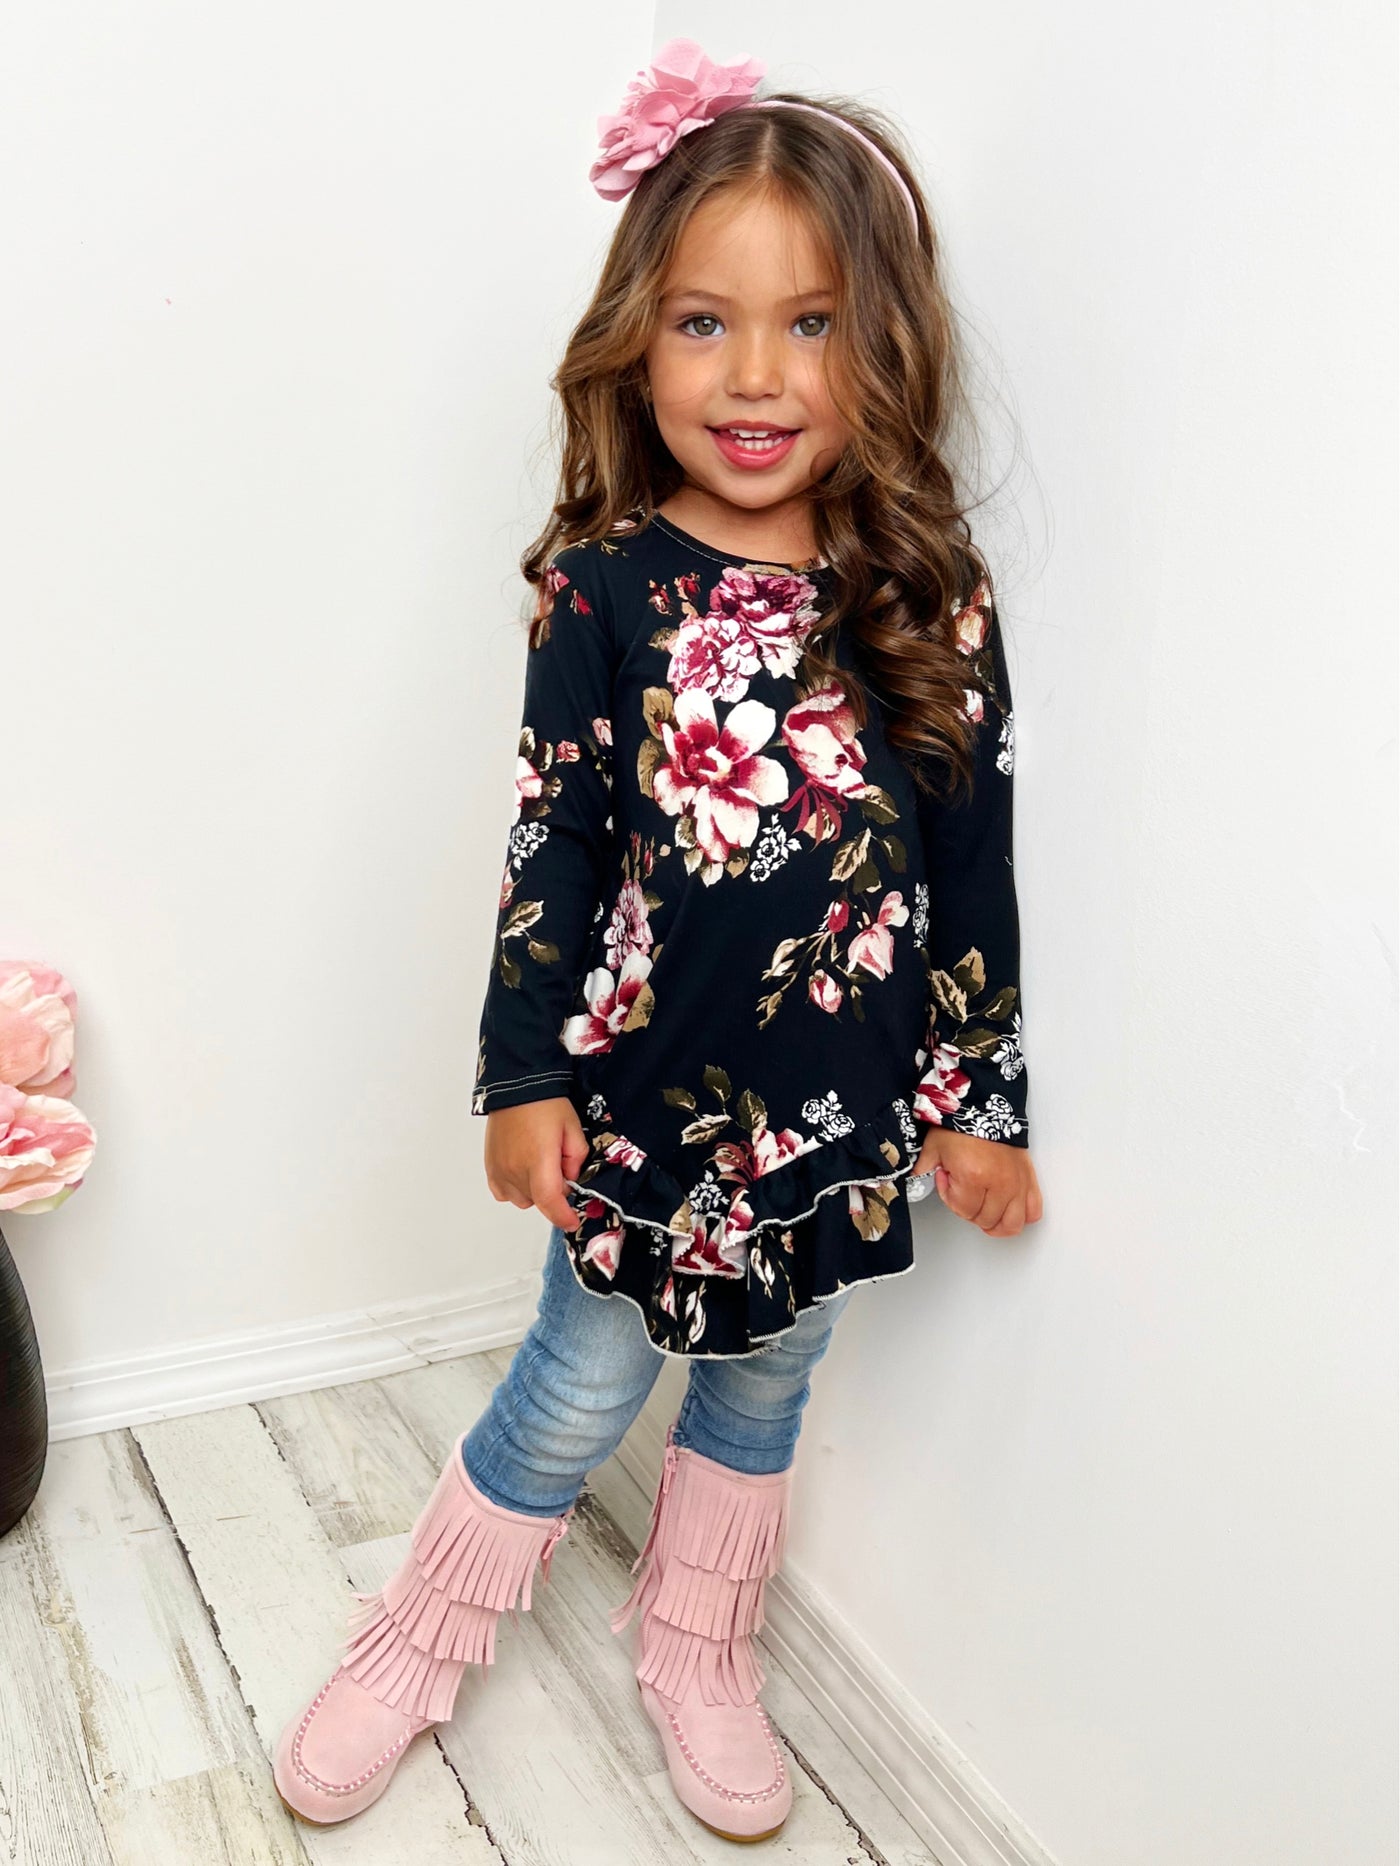 Mia Belle Girls Floral Top | Girls Fall Outfits